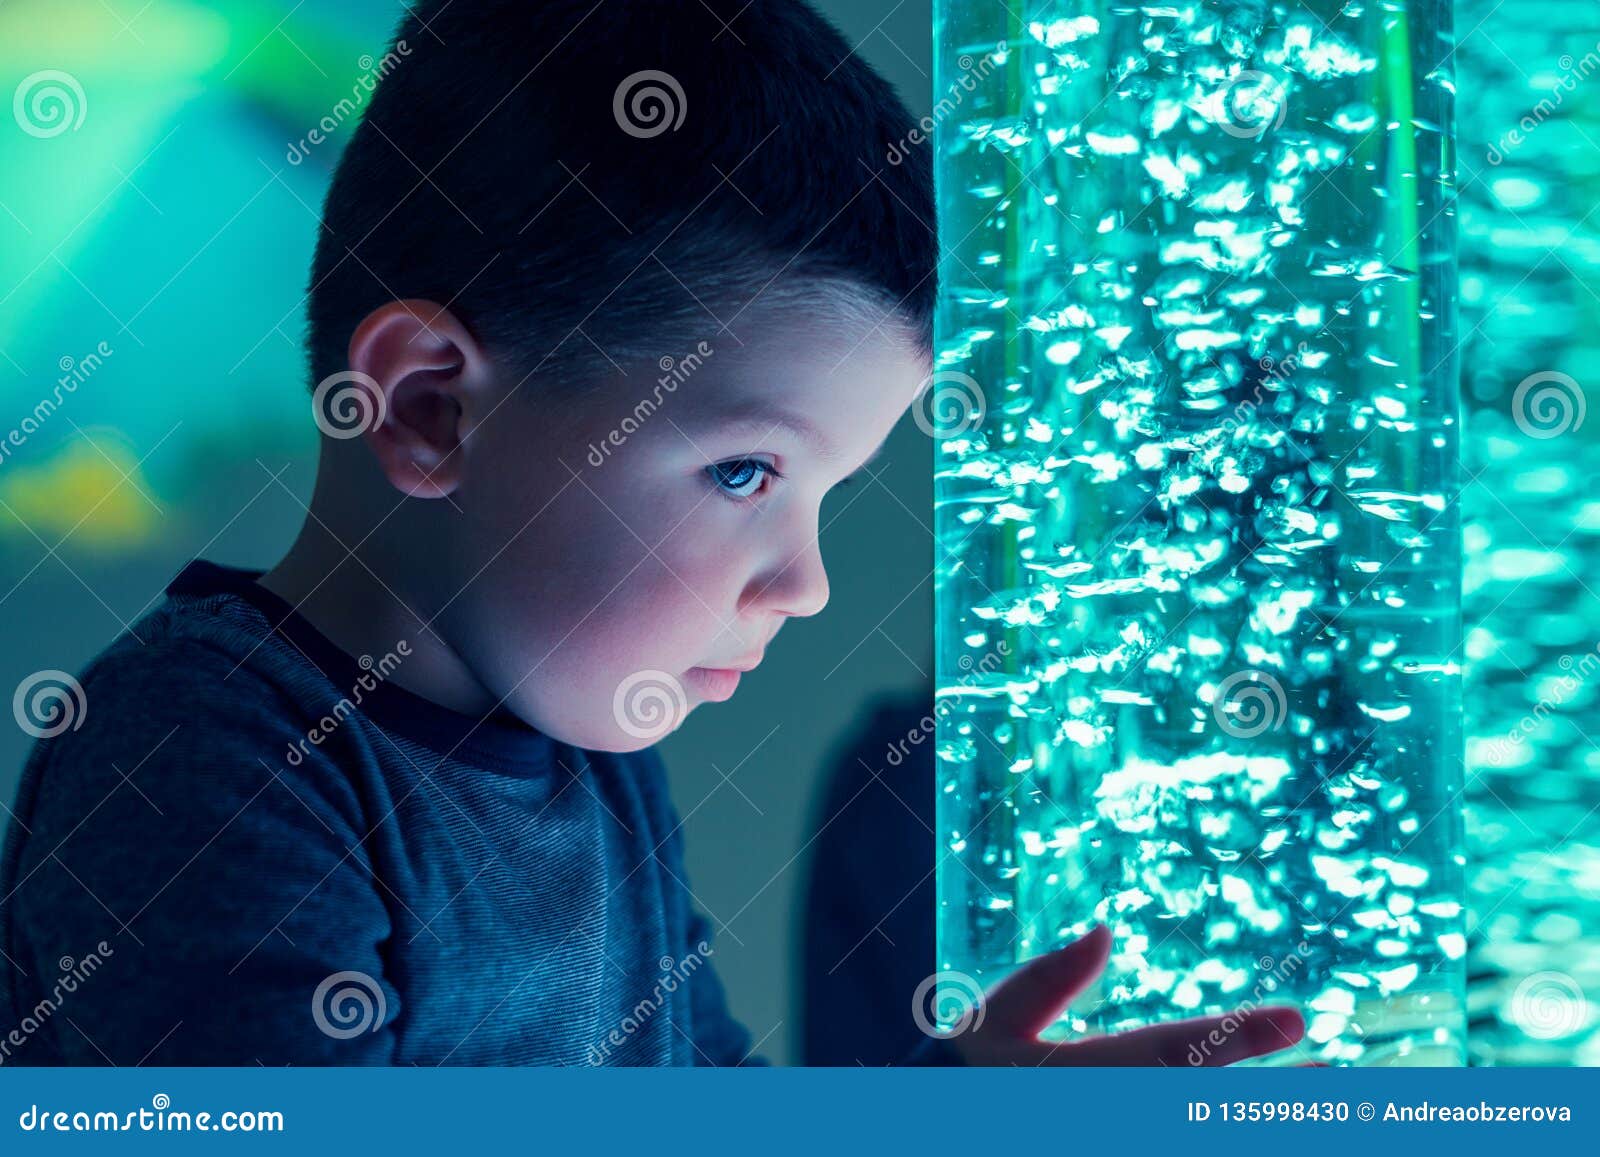 child in therapy sensory stimulating room, snoezelen. child interacting with colored lights bubble tube lamp during therapy.